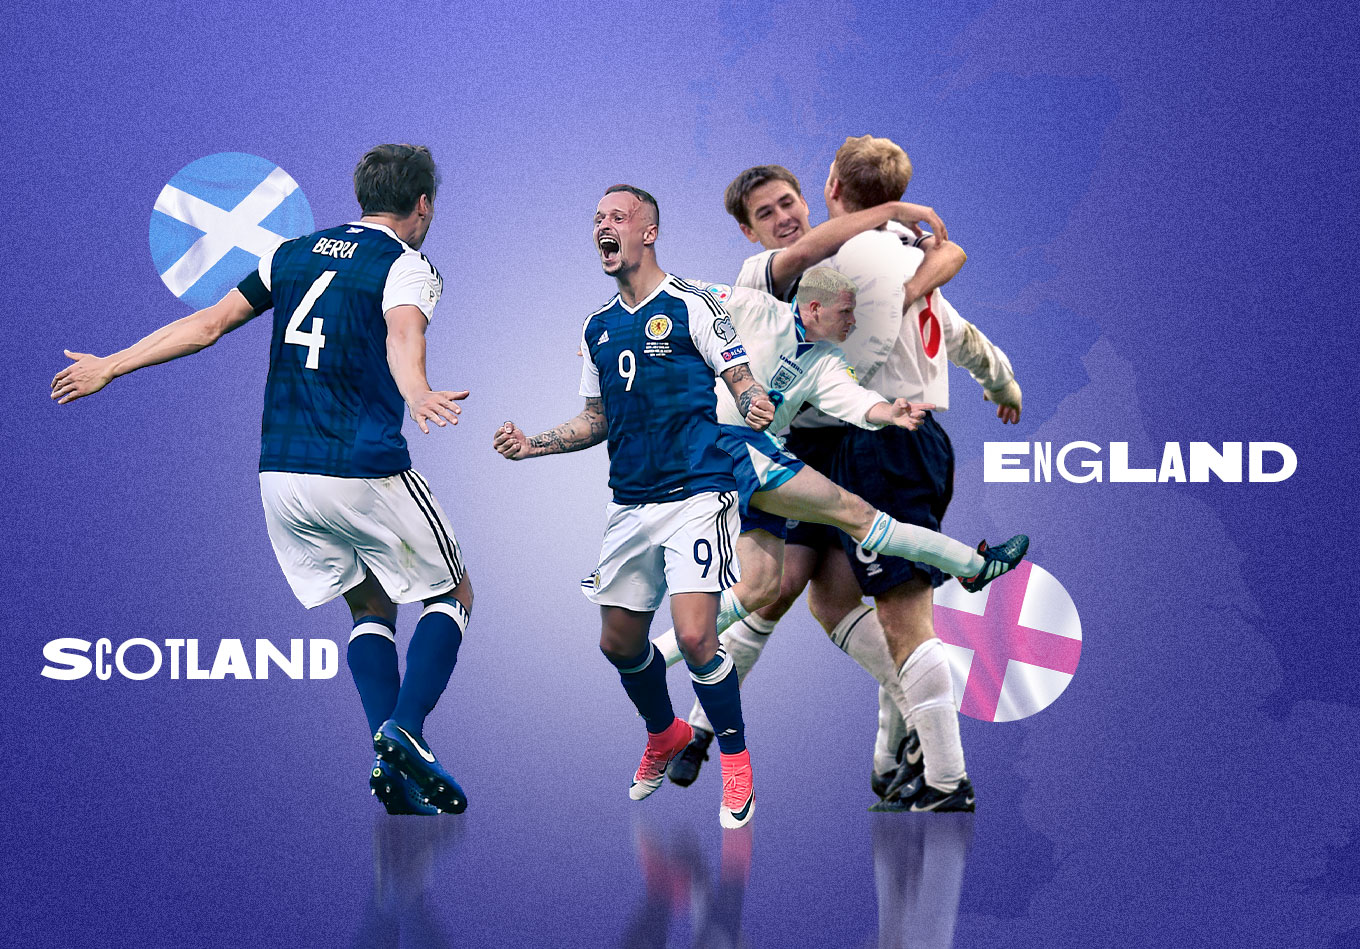 For 80 Years, Scotland Were Better Than England